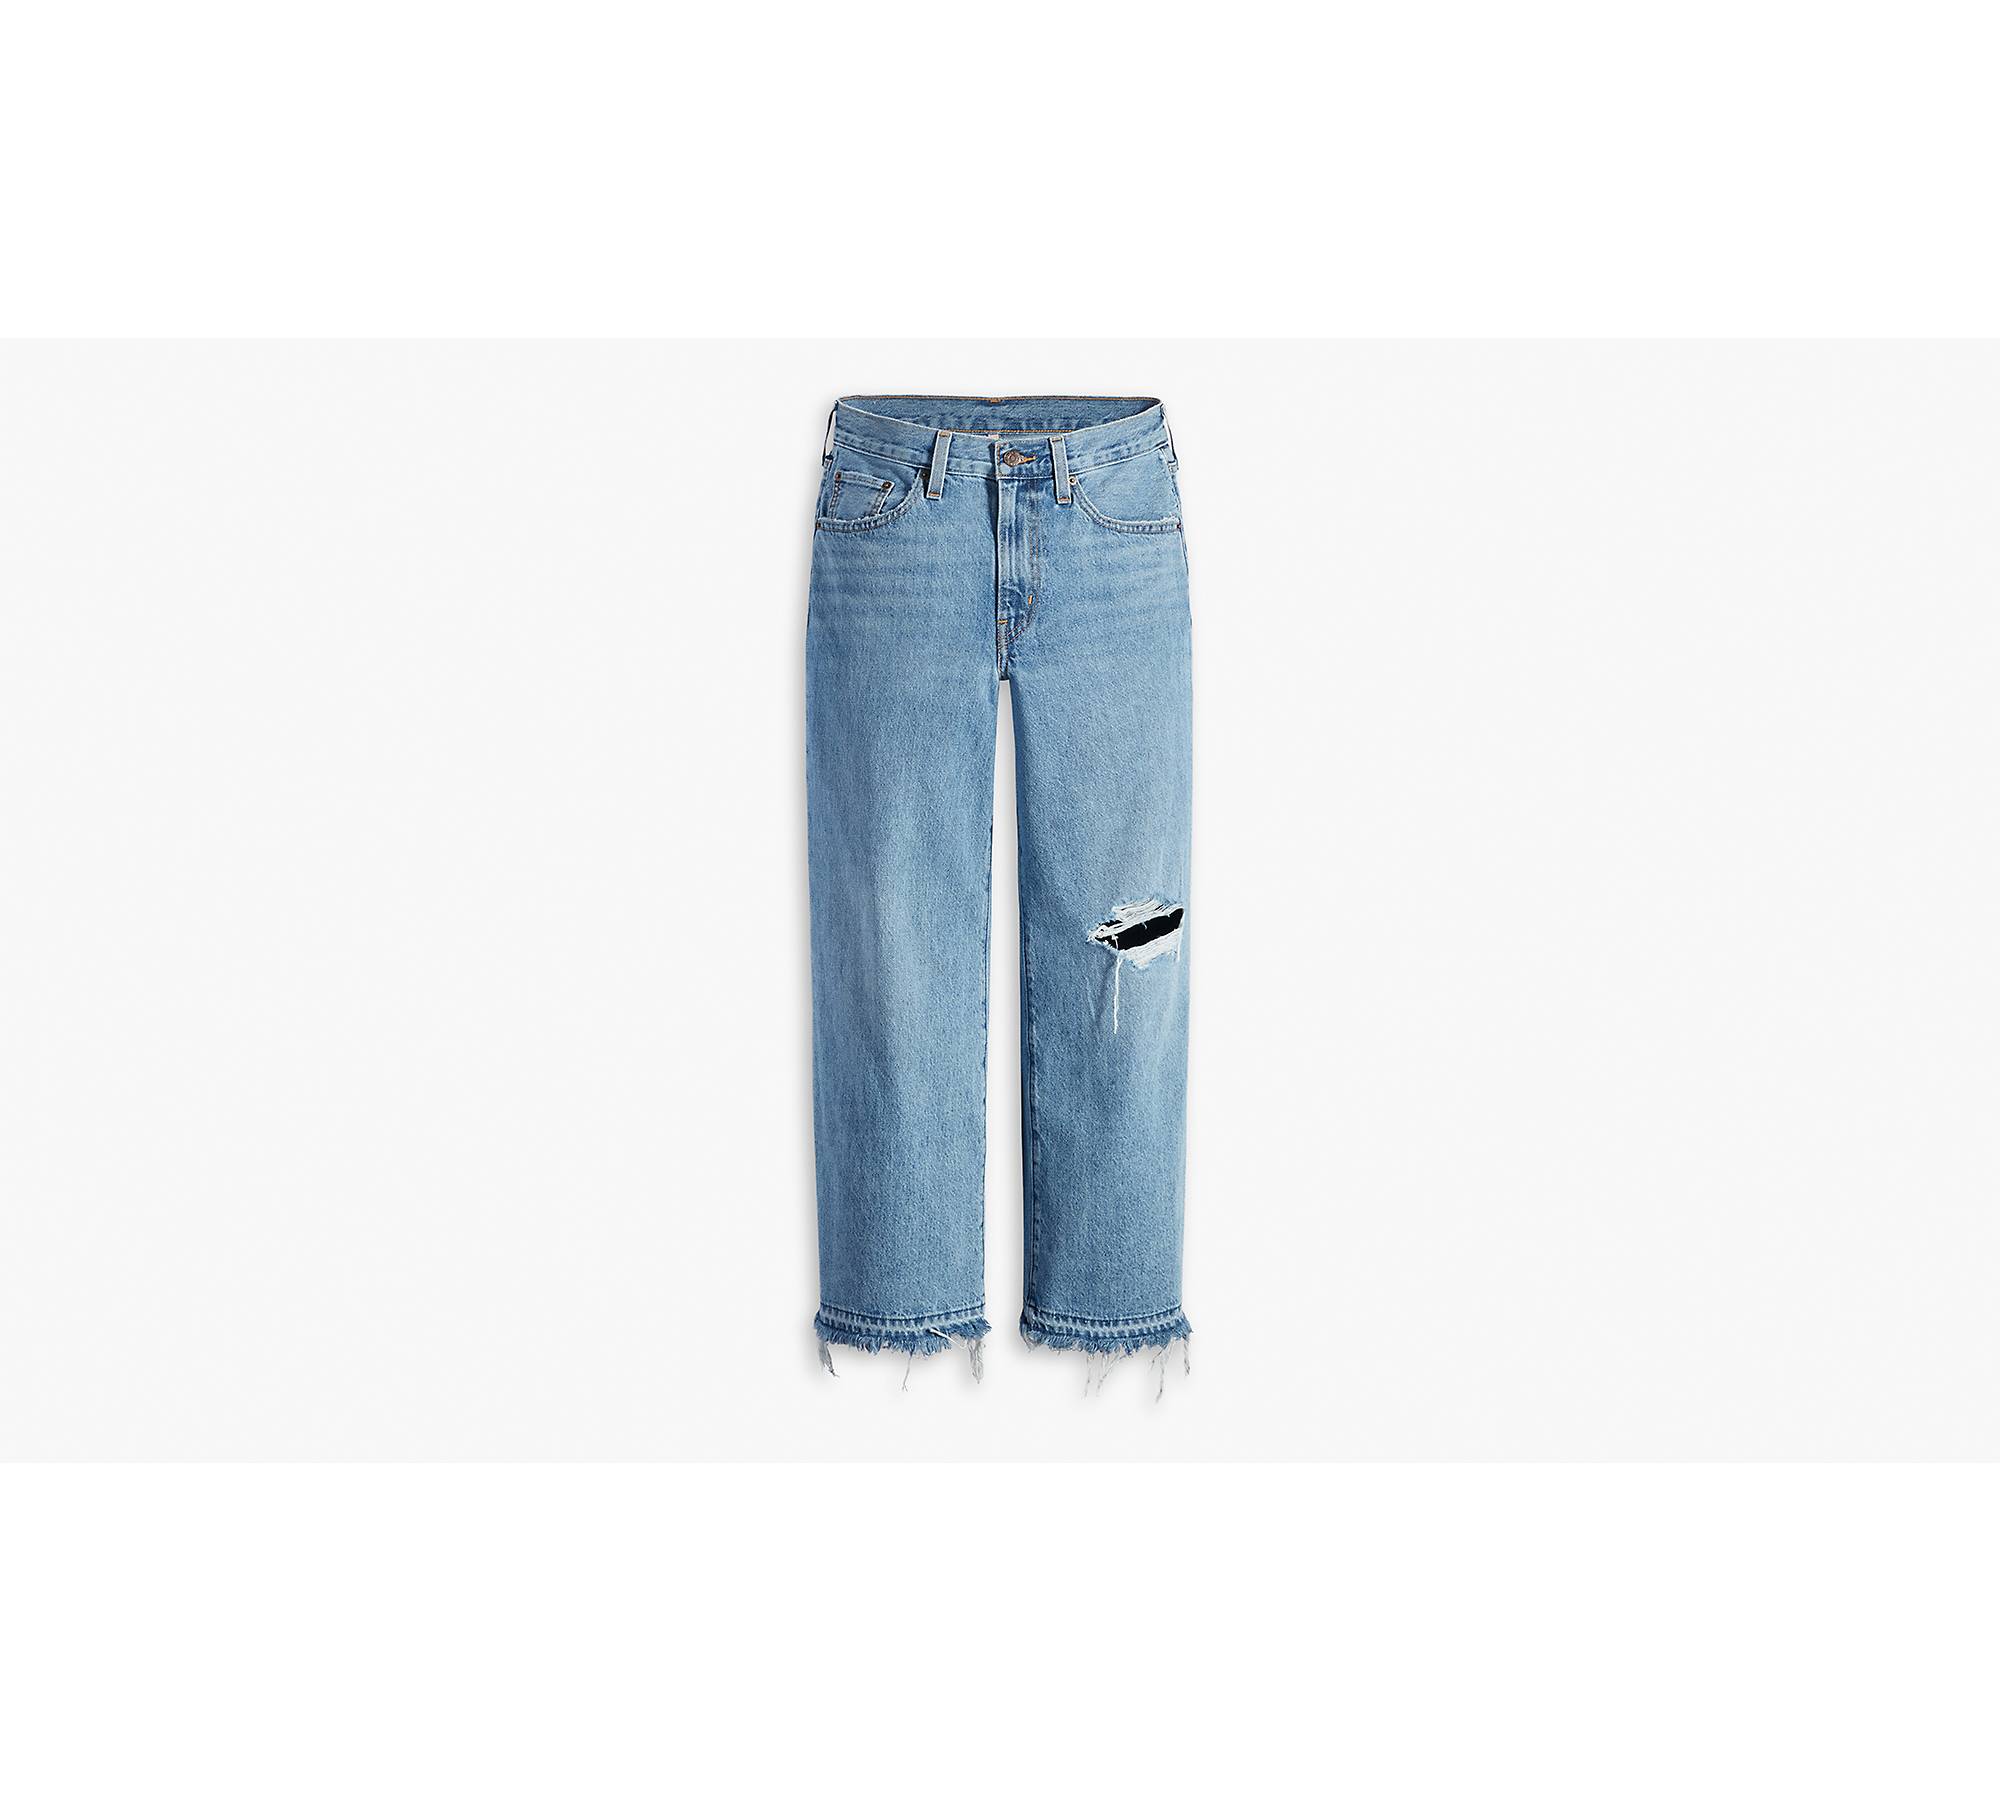 Baggy High Water Jeans - Medium Wash